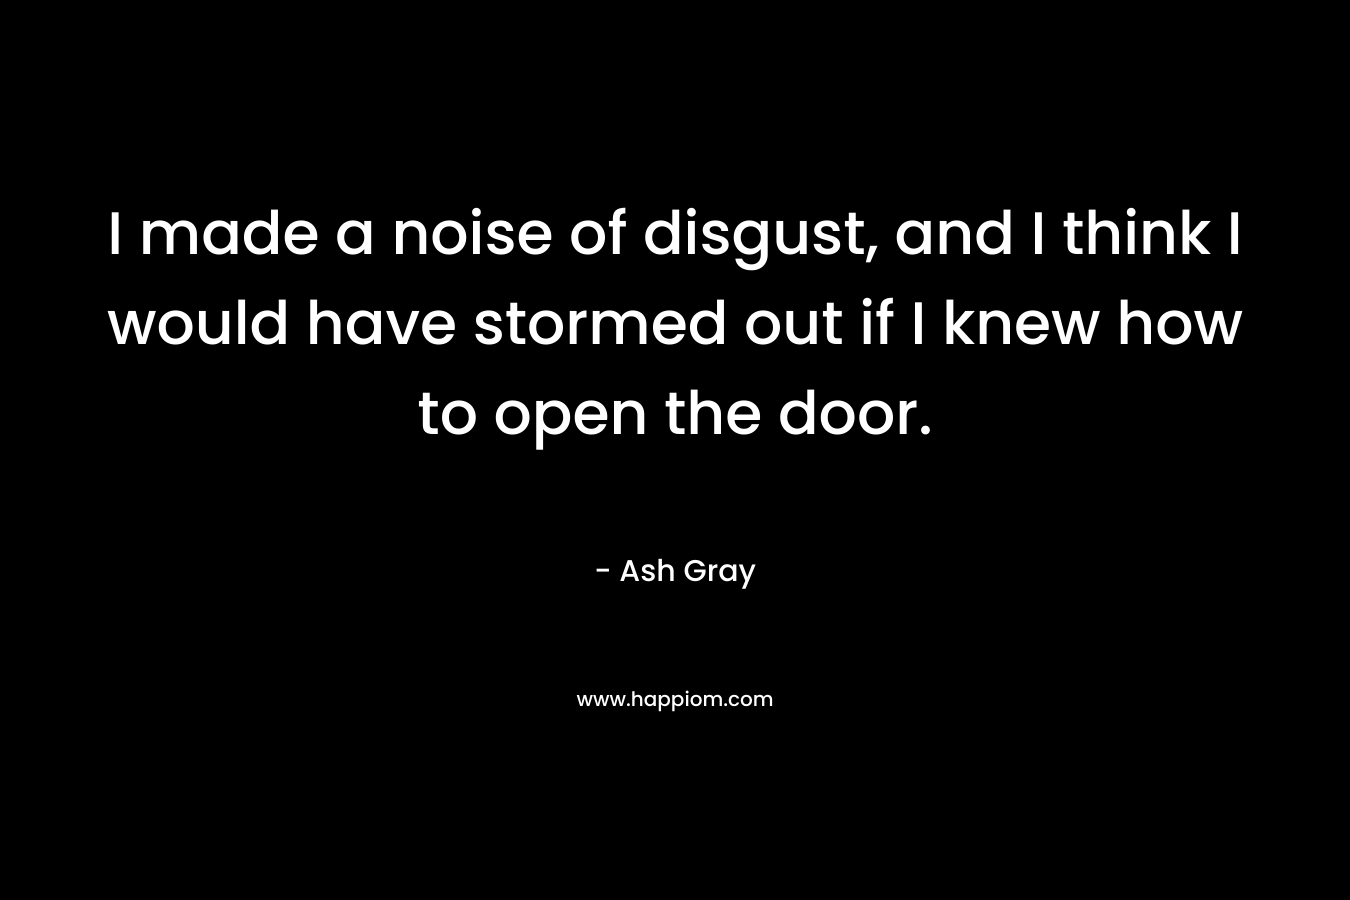 I made a noise of disgust, and I think I would have stormed out if I knew how to open the door. – Ash Gray